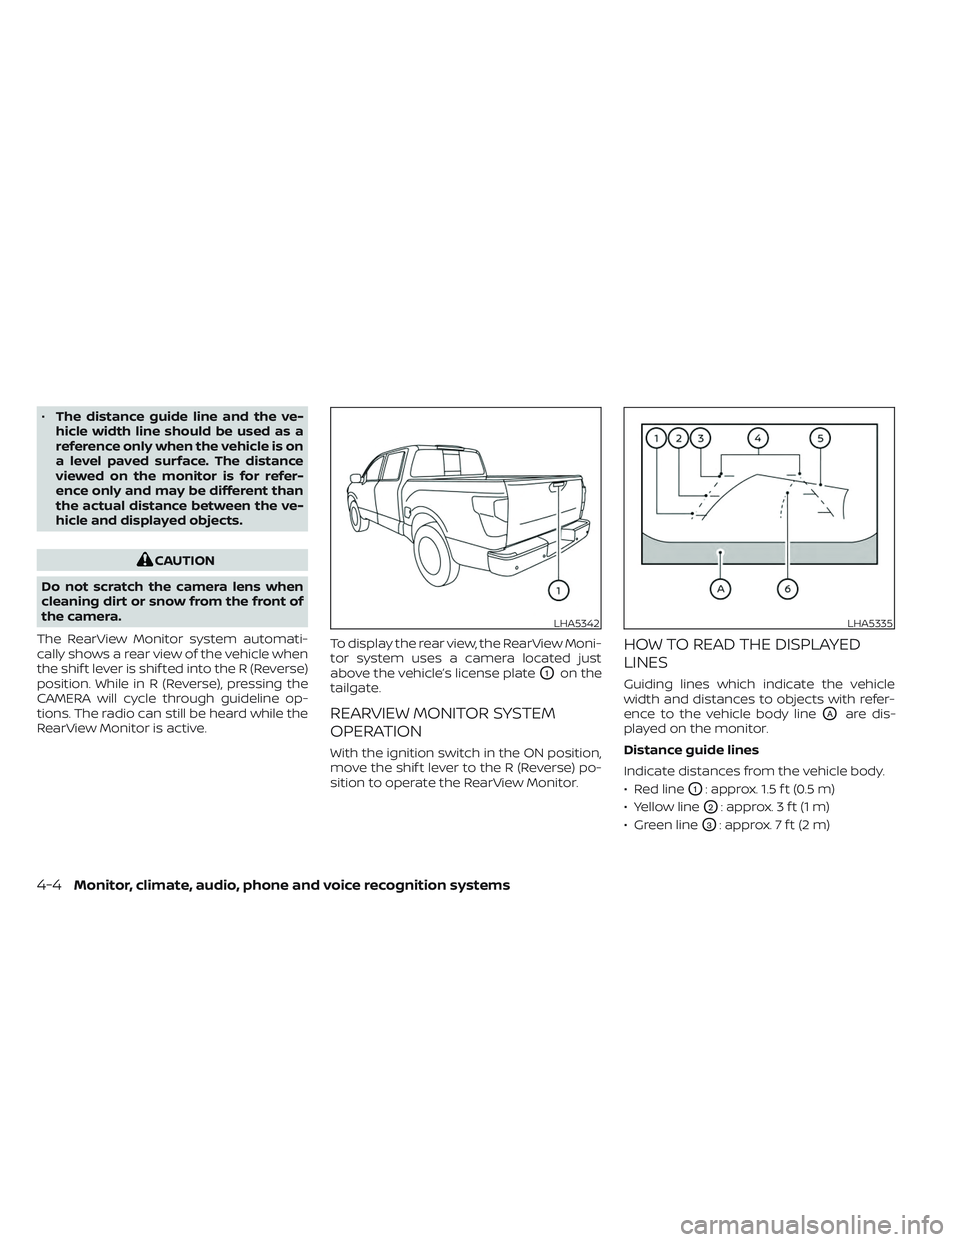 NISSAN TITAN 2022  Owners Manual •The distance guide line and the ve-
hicle width line should be used as a
reference only when the vehicle is on
a level paved surface. The distance
viewed on the monitor is for refer-
ence only and 